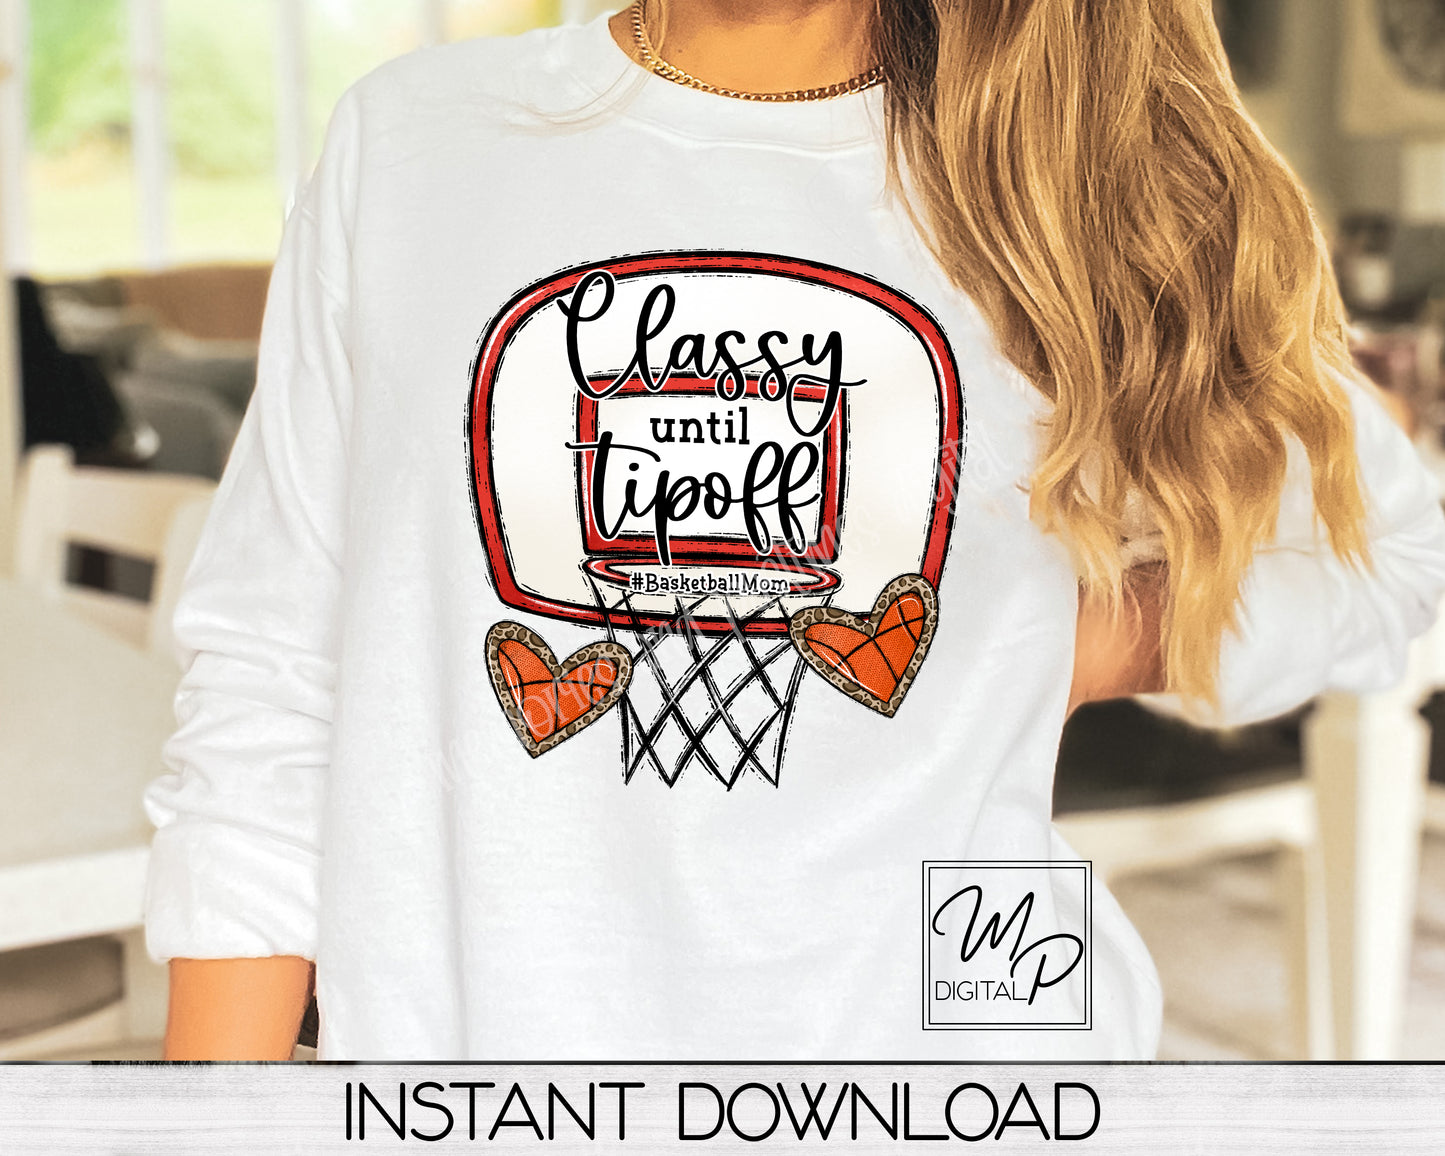 Basketball Mom PNG Sublimation Design, Classy Until Tipoff - Commercial Use